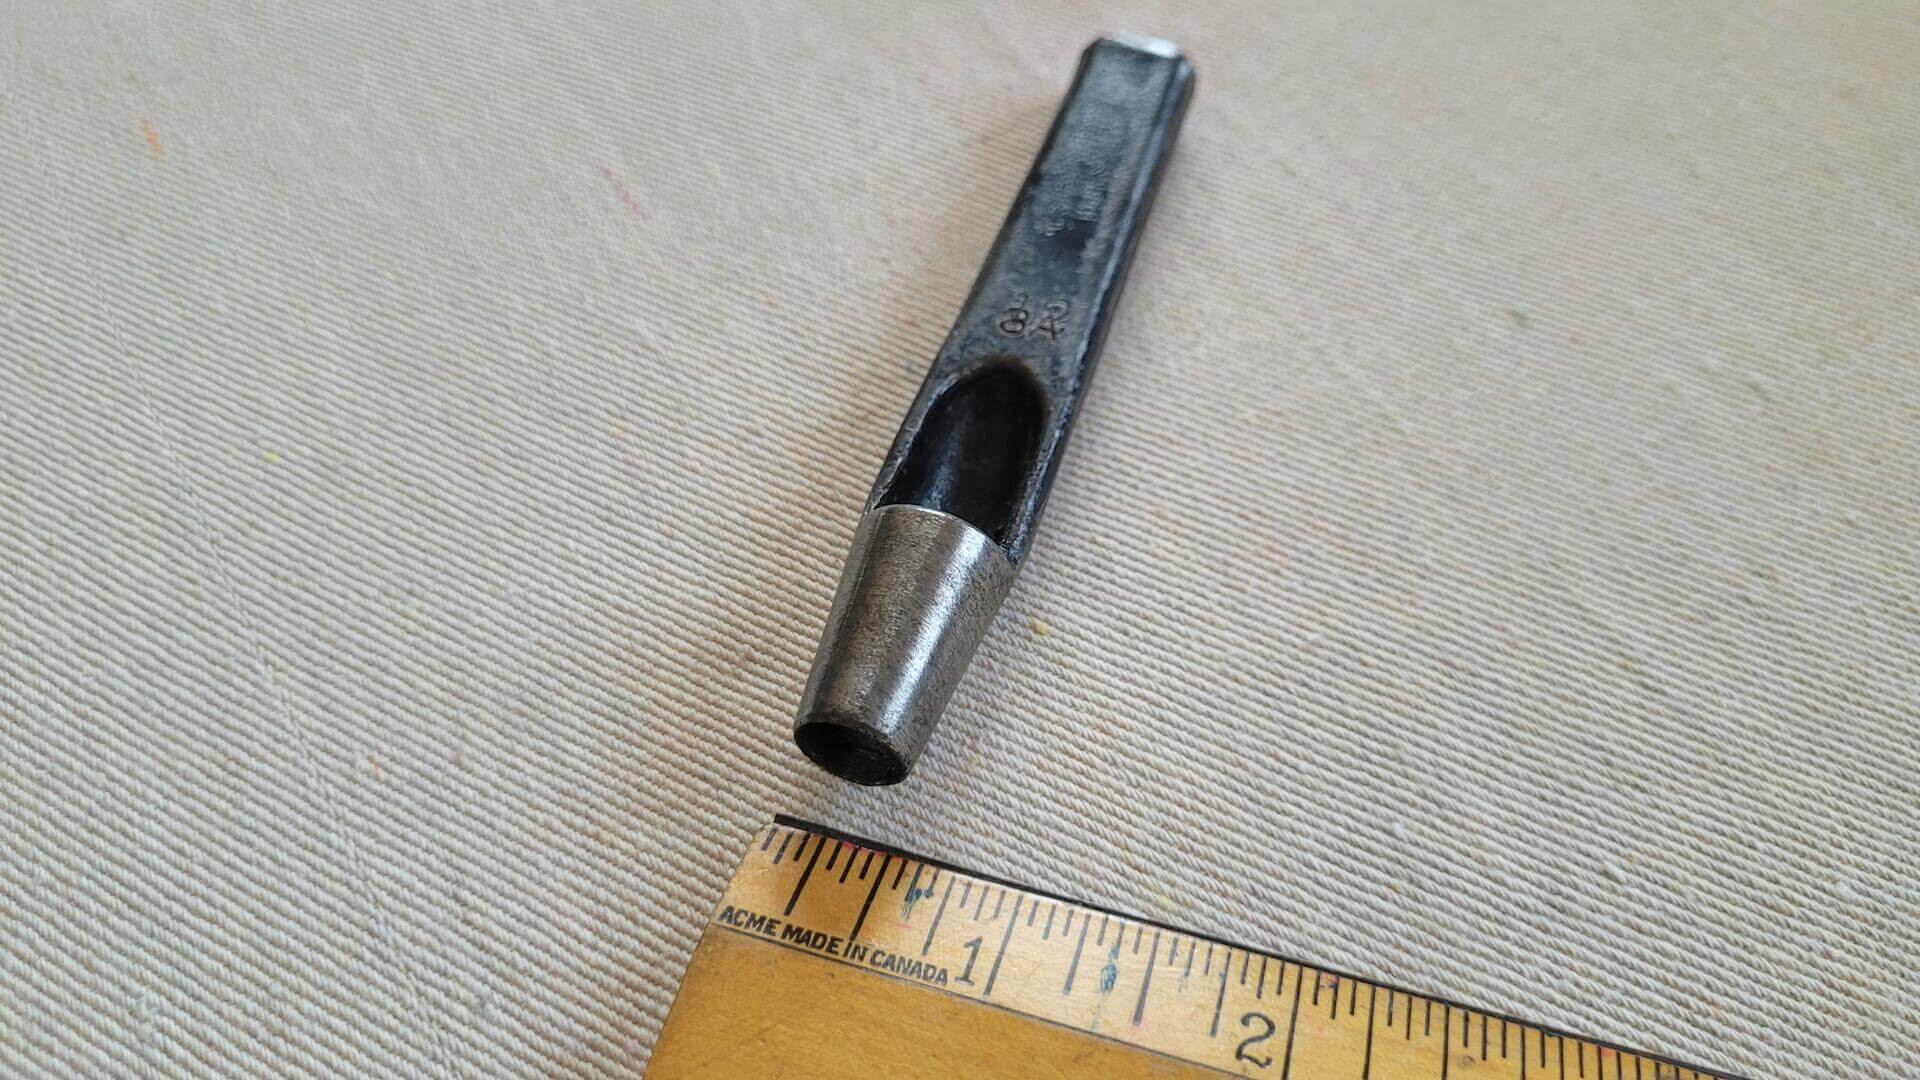 Vintage C.S. Osborne #12 or 13/32" leather cutting round whole drive punch. Antique made in USA Harrison NJ collectible leathercraft hand tools